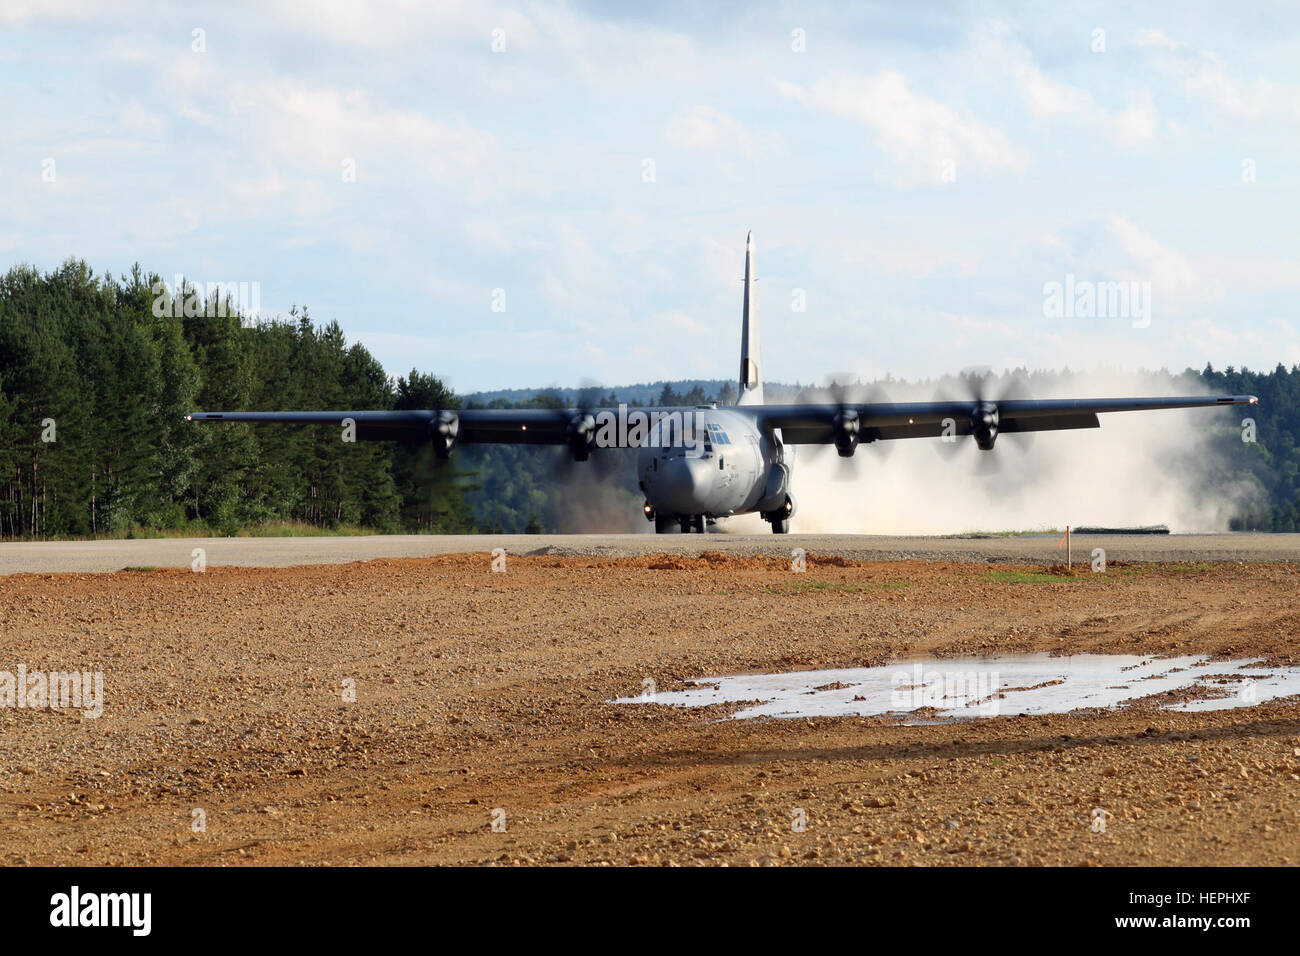 A United States Air Force C-130 aircraft lands at Hohenfels Training Area, July 29. The aircraft was used to test the capabilities of the recently resurfaced and extended Short Take Off Landing strip at Hohenfels, the only dirt airstrip in Germany capable of supporting aircraft as large as the C-130. Having this new capability allows for increased interagency training opportunities, such as the upcoming Swift Response 15, which will include several NATO Allies and more than 1,400 multinational participants. (U.S. Army photo by Staff Sgt. Jerry Boffen, 130th Public Affairs Detachment, Connectic Stock Photo